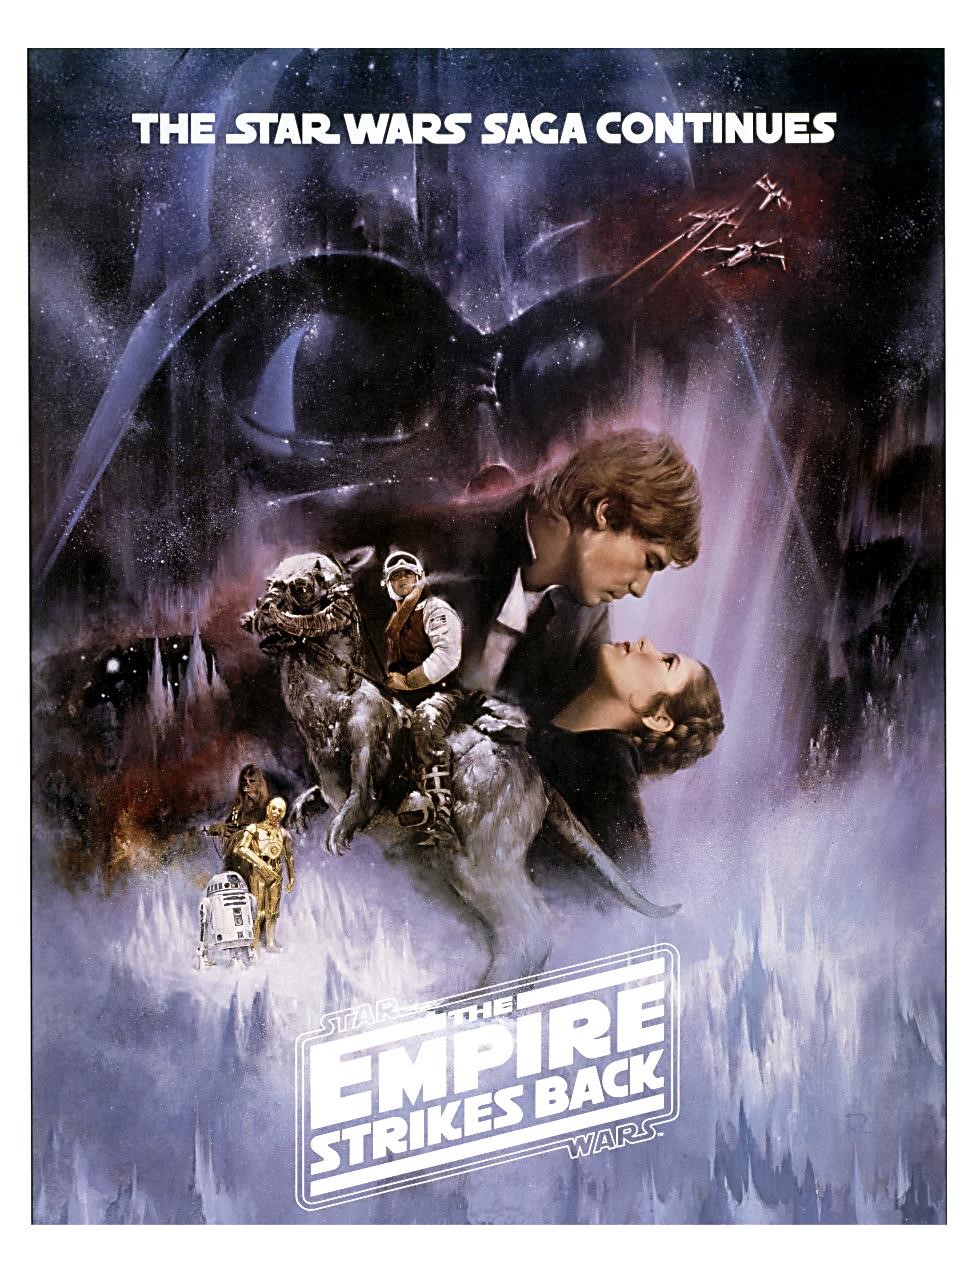 Film poster for STAR WARS: THE EMPIRE STRIKES BACK (1980)